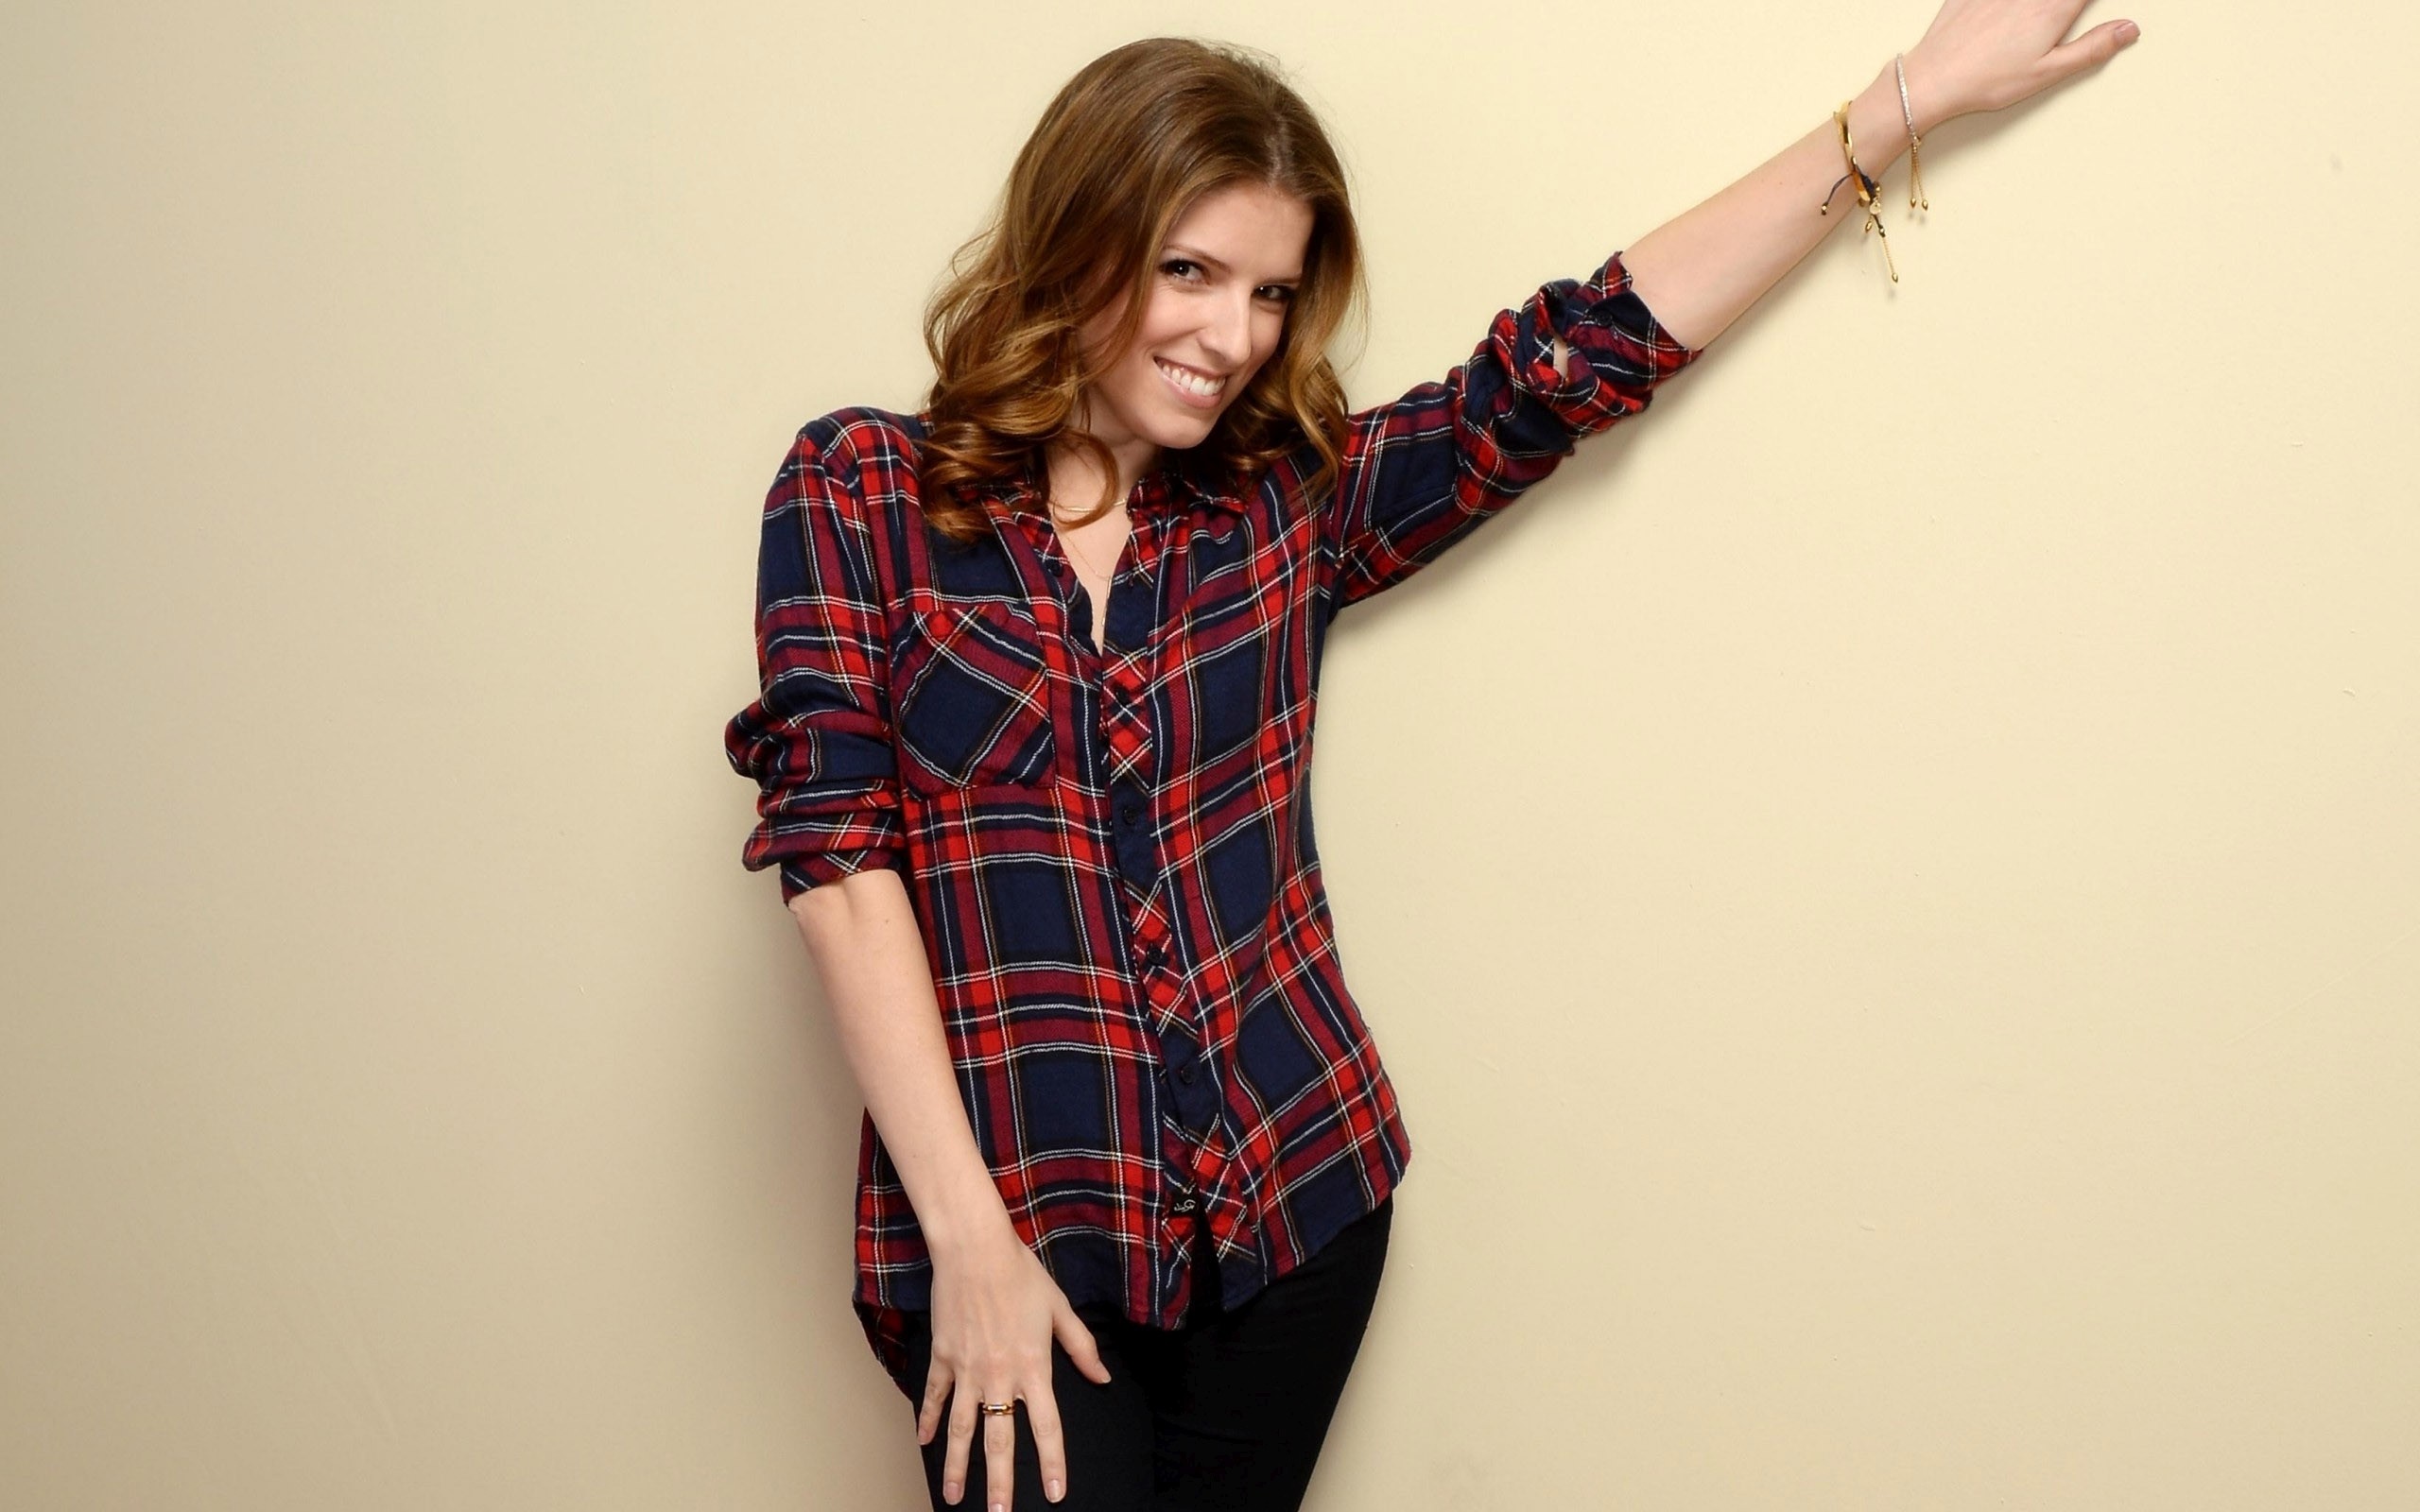 People 2560x1600 Anna Kendrick actress celebrity women simple background brunette plaid shirt one arm up shirt hand on leg American women studio beige background looking at viewer